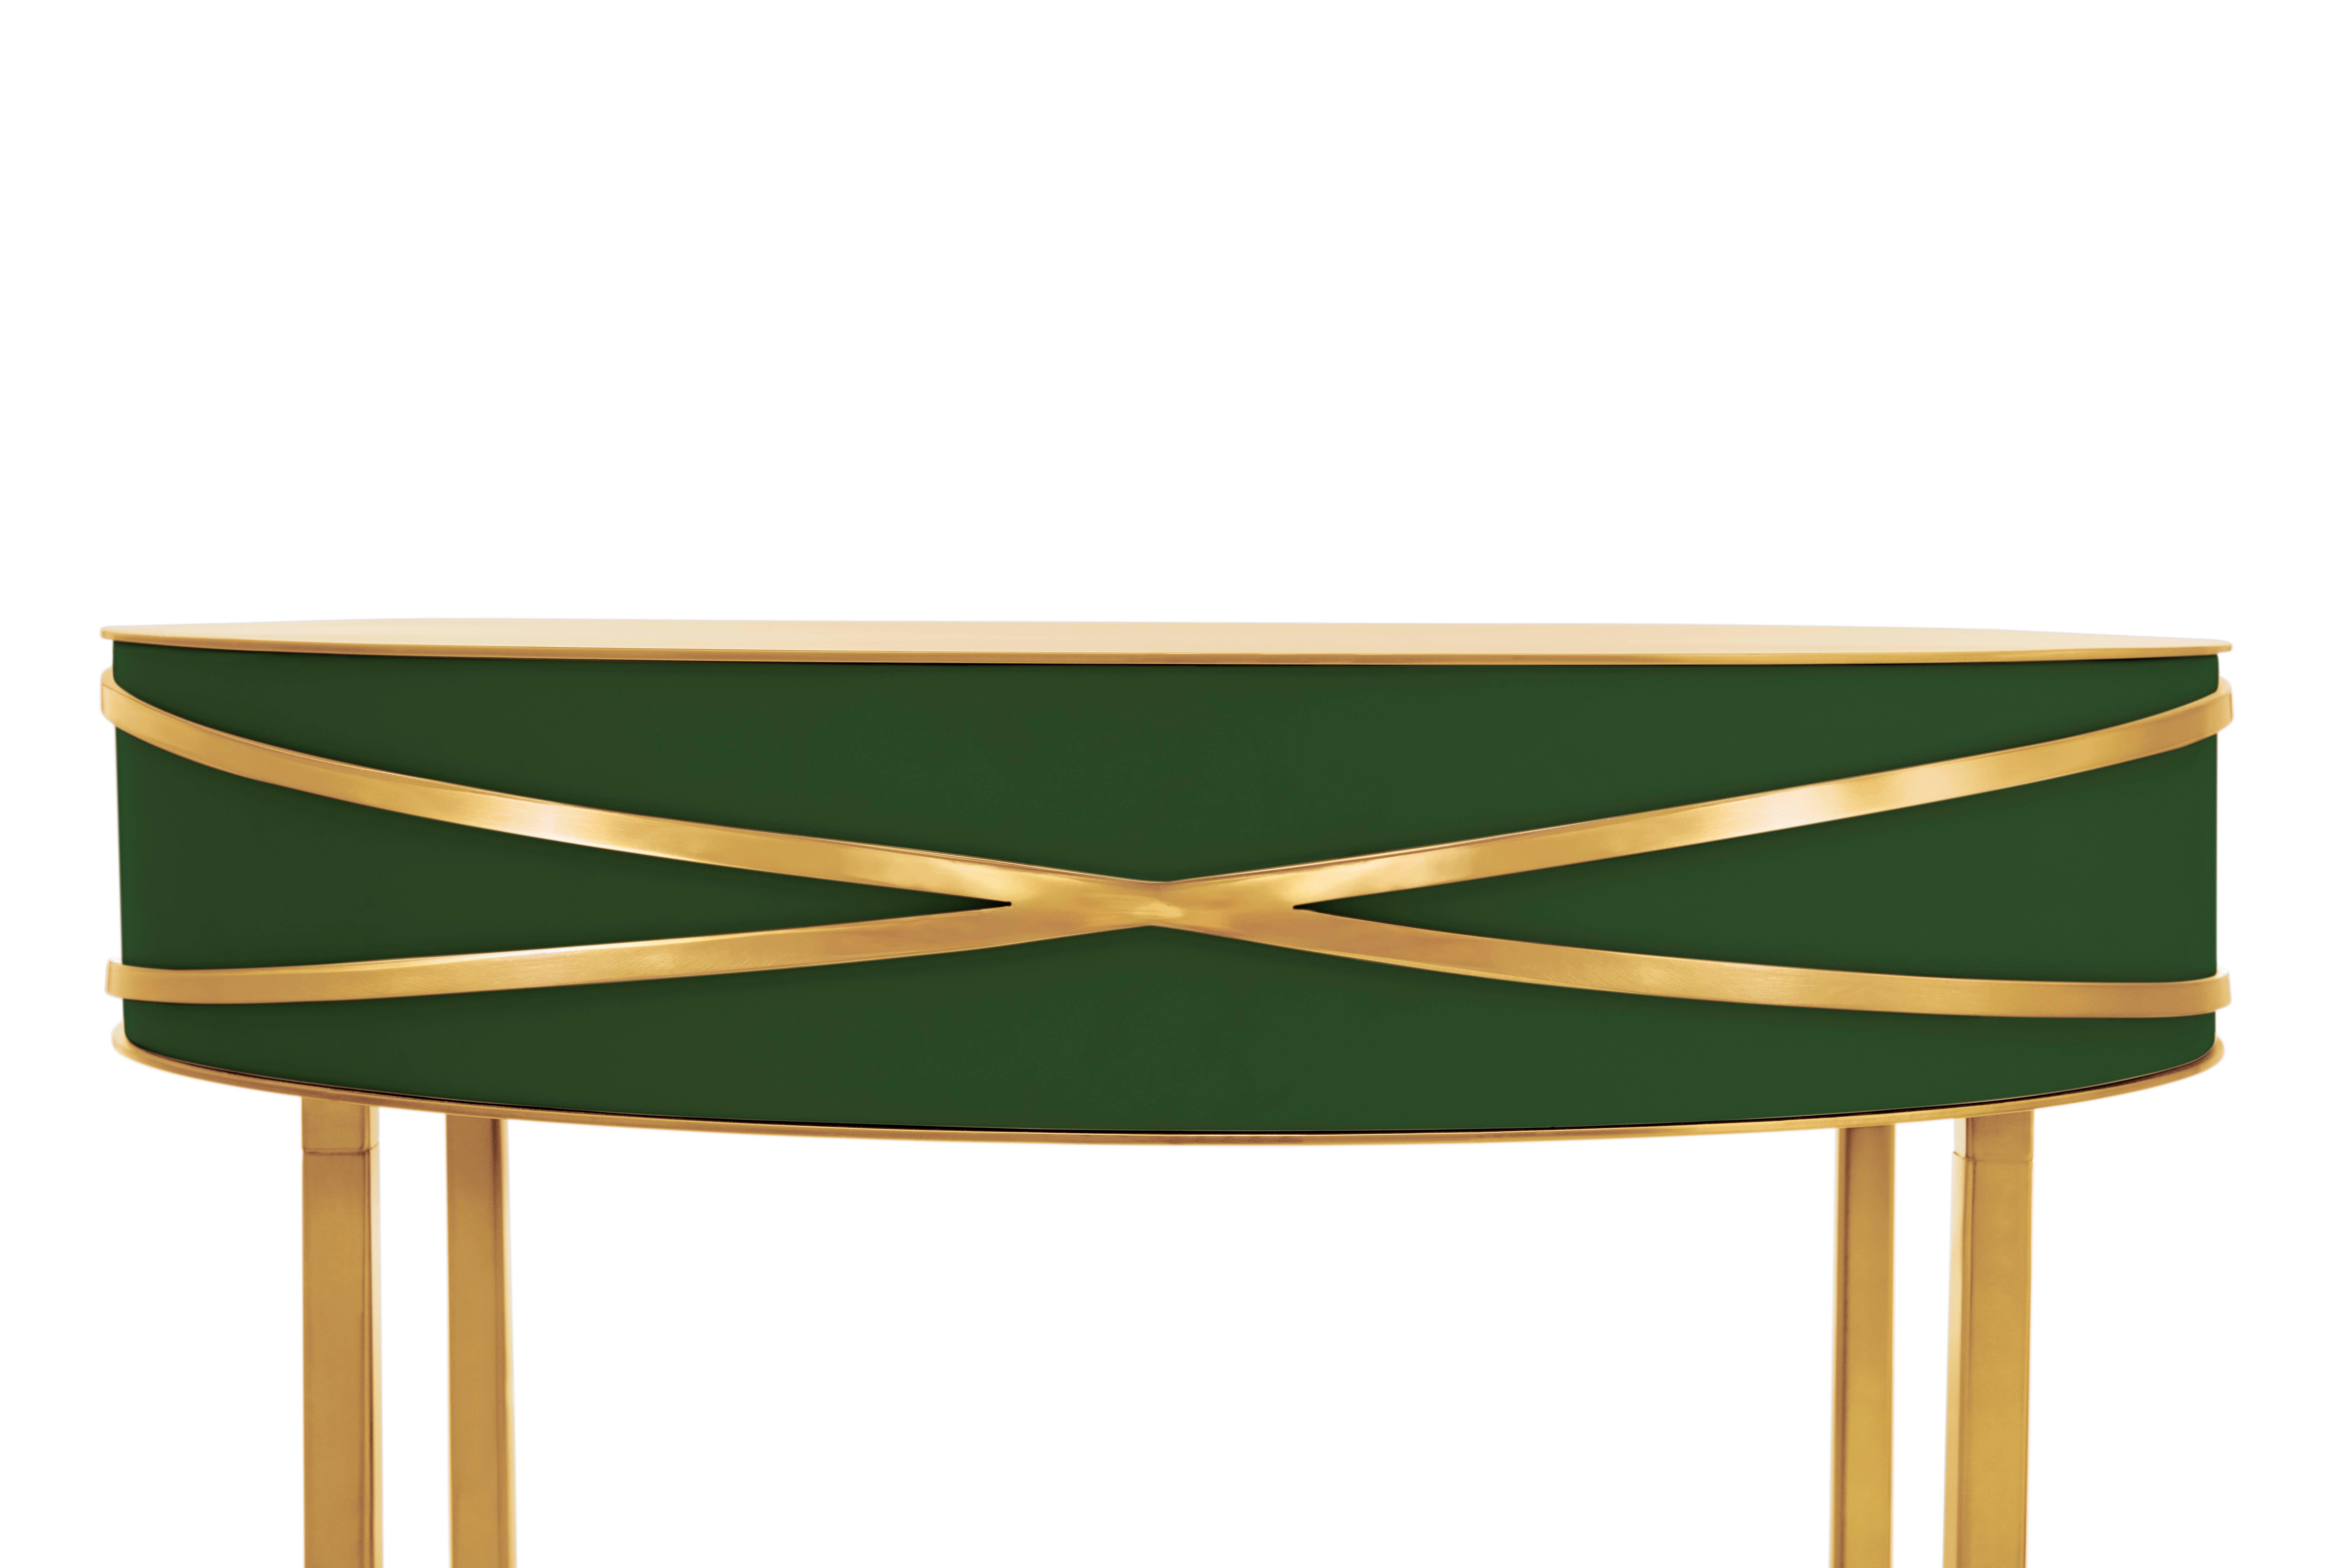 Stella Green Console or Bedside Table with Gold Trims by Nika Zupanc is a deep green console table with a drawer, and metal trims in gold.

Nika Zupanc, a strikingly renowned Slovenian designer, never shies away from redefining the status quo of